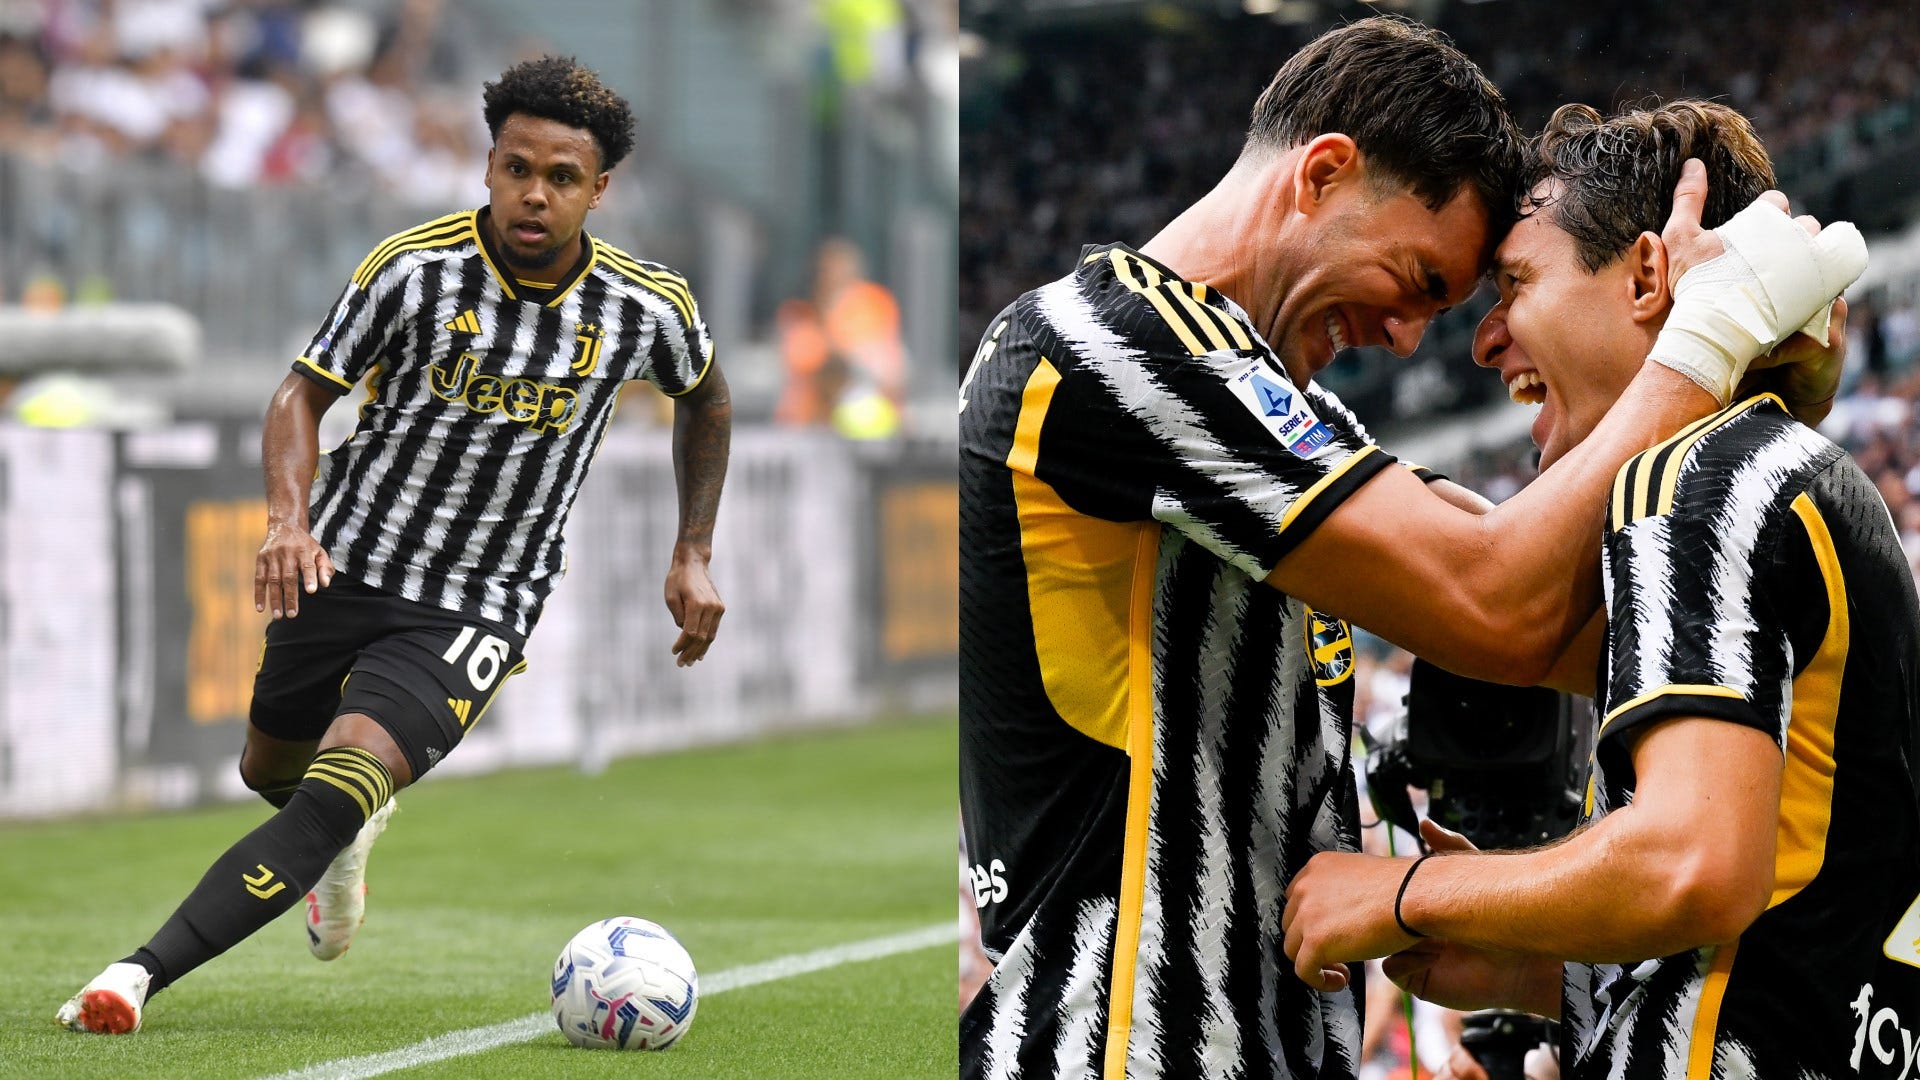 USMNT star Weston McKennie marks 100th Juventus appearance with superb assist but Tim Weah misses golden chance to grab first Serie A goal in win over Lazio Goal